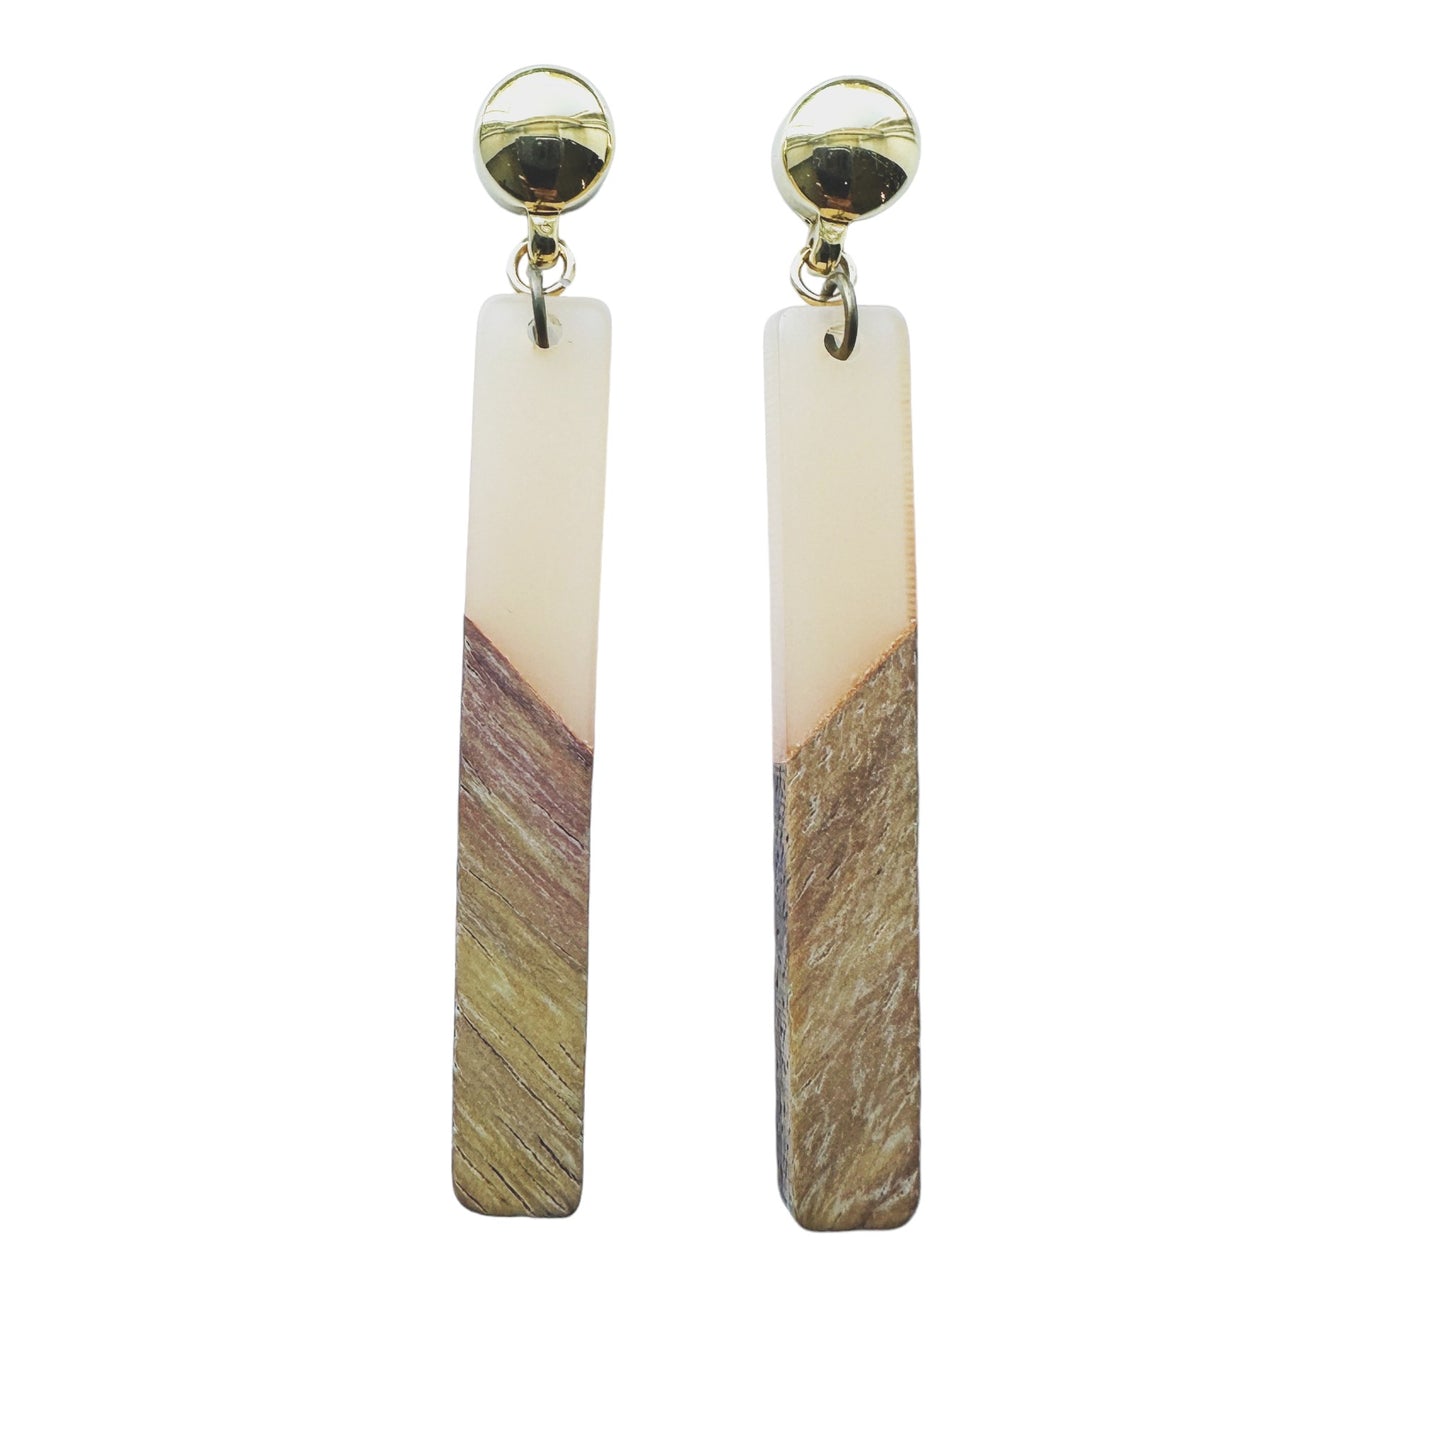 TI-GO translucent wood earrings. Detachable earrings for a truly hypoallergenic jewellery on a white background